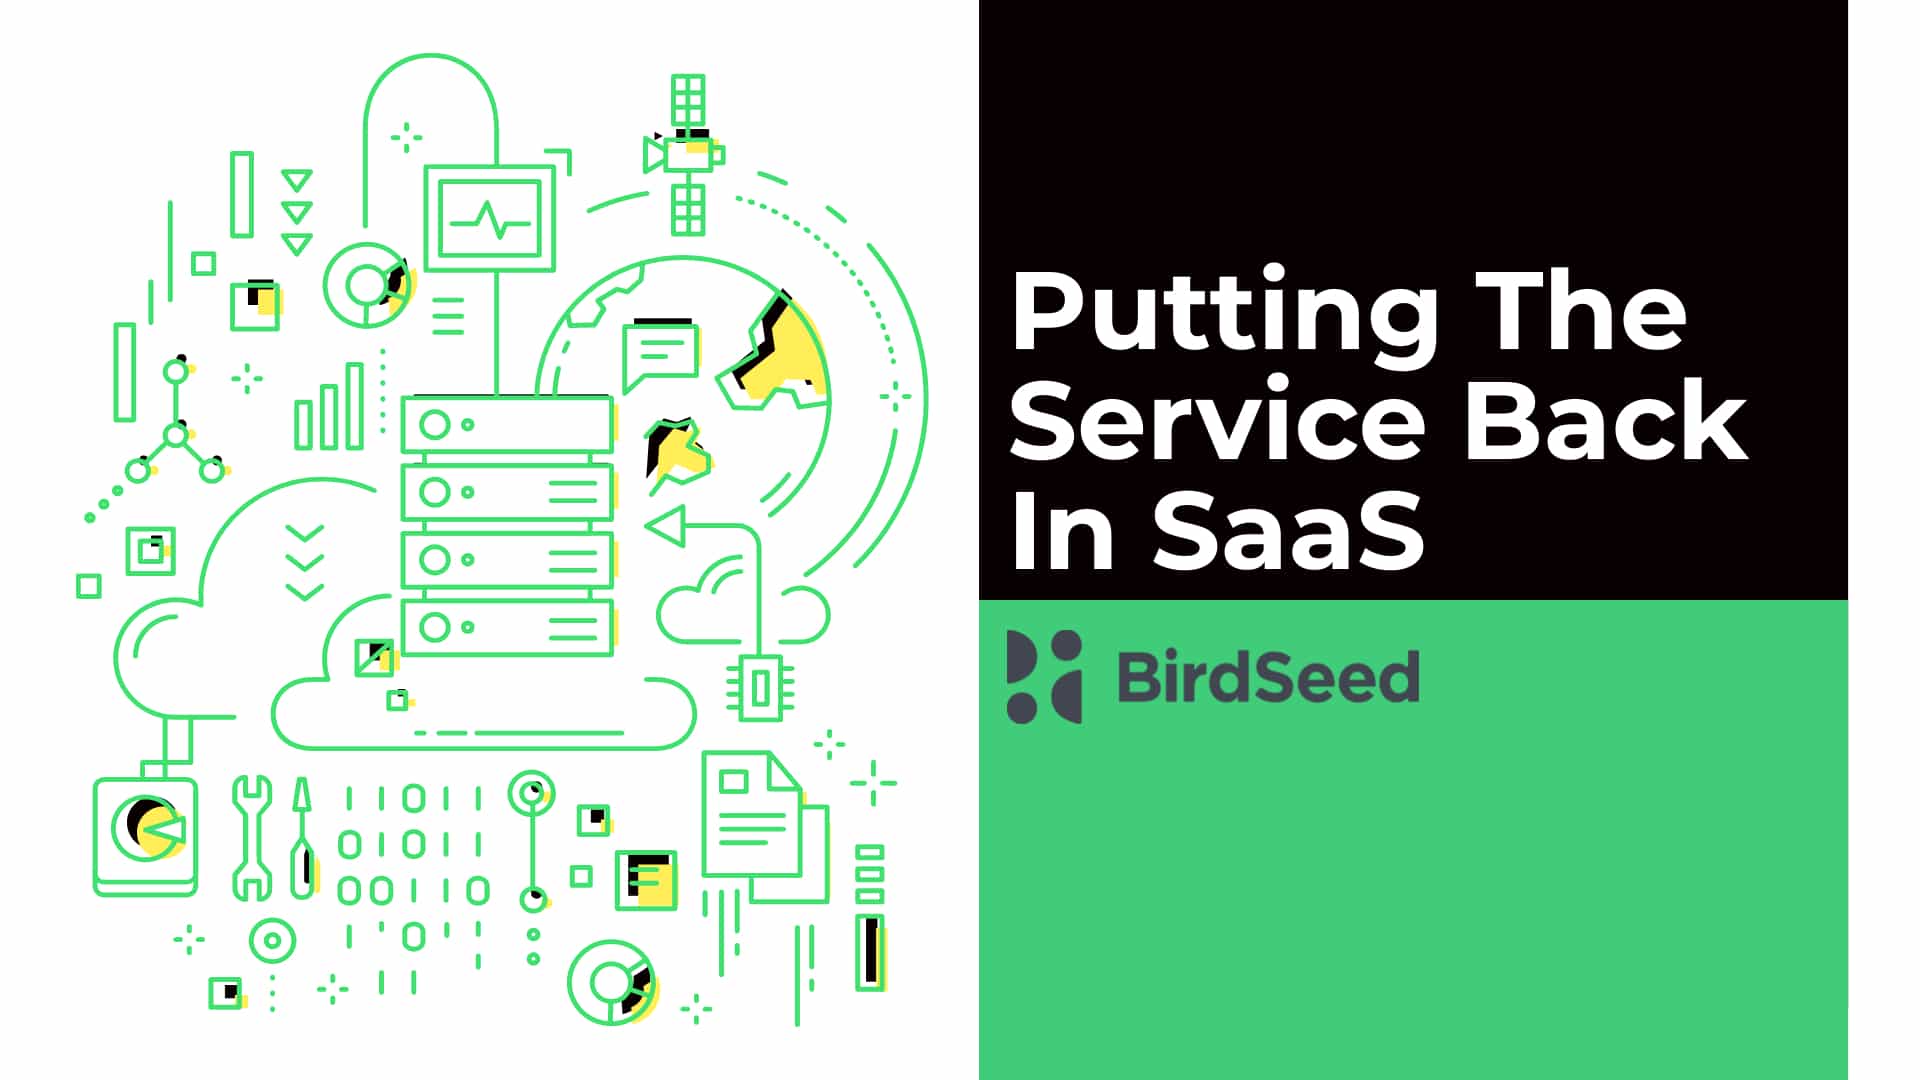 Putting The Service Back in SaaS